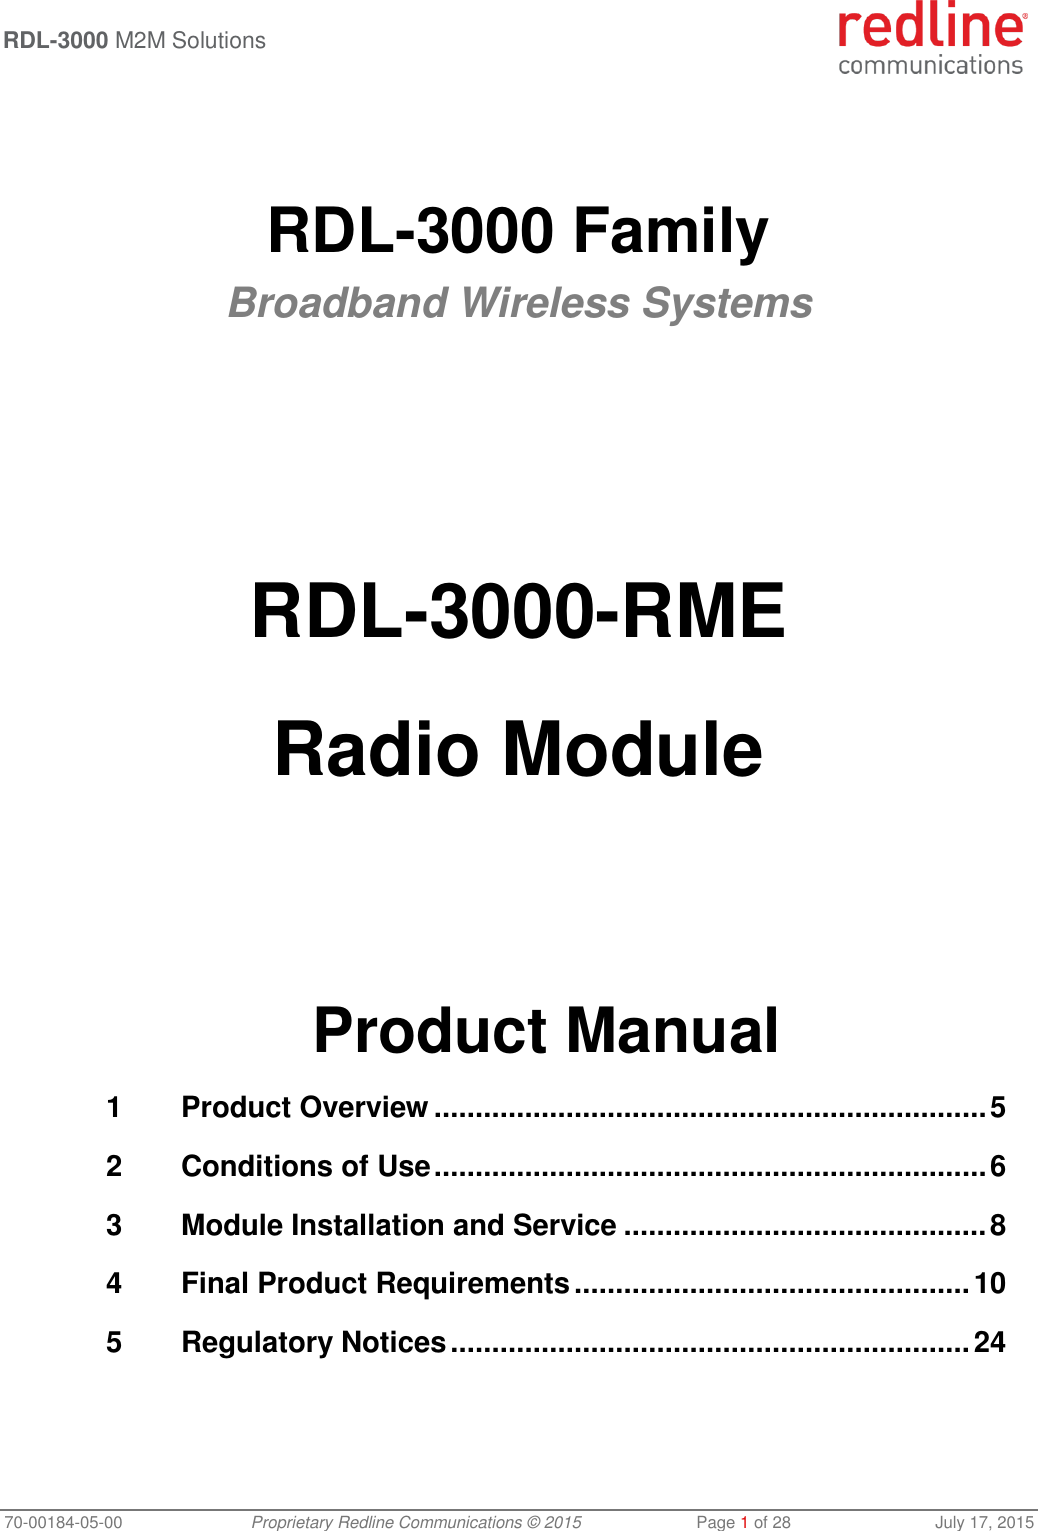  RDL-3000 M2M Solutions   70-00184-05-00 Proprietary Redline Communications © 2015  Page 1 of 28  July 17, 2015   RDL-3000 Family Broadband Wireless Systems         RDL-3000-RME  Radio Module       Product Manual 1 Product Overview ................................................................... 5 2 Conditions of Use ................................................................... 6 3 Module Installation and Service ............................................ 8 4 Final Product Requirements ................................................ 10 5 Regulatory Notices ............................................................... 24 